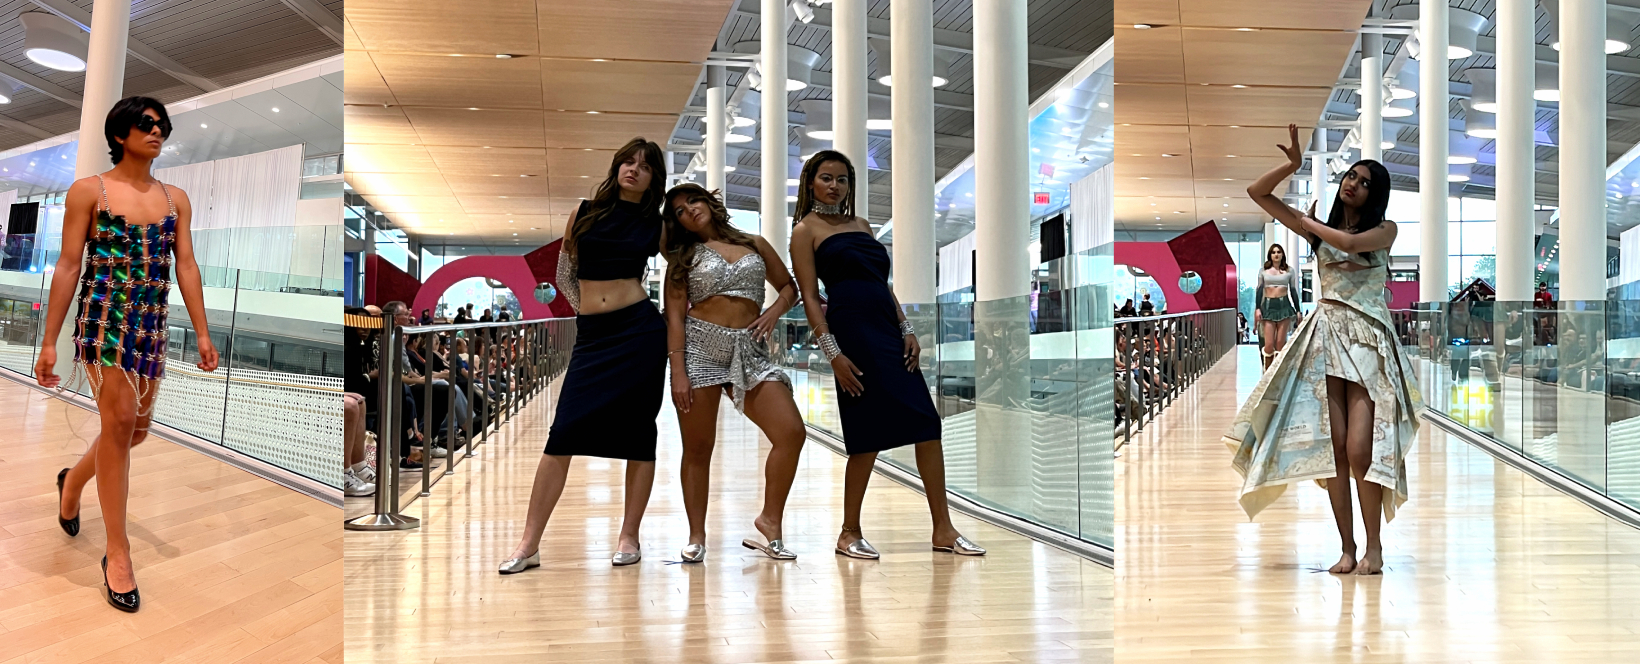 Three images of runway models from ReFashioned 2024. L-R: A person wearing a mini dress made of rainbow, shiny plastic pieces; three women pose, with the woman on the left wearing a black crop top, a black skirt, and a silver sleeve; the middle woman wearing a shiny silver crop top and skirt; the woman on the right wearing a strapless black dress with silver bangles on her wrists. On the right: a woman wears a dress made of paper maps and poses with her hands lifted to her right.